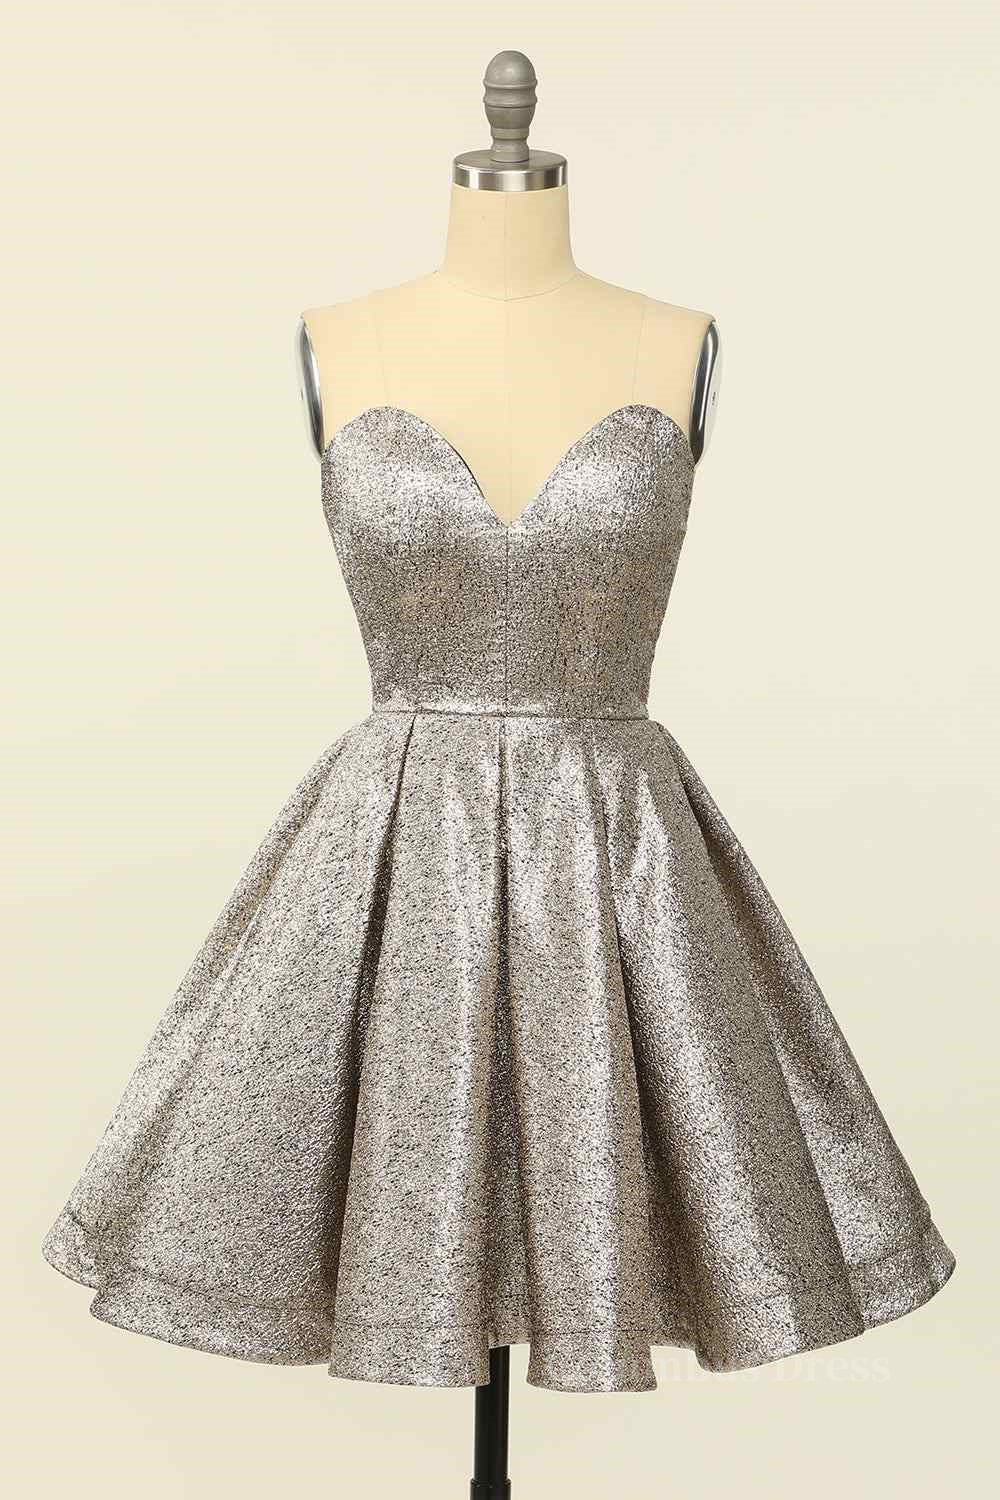 Party Dress Boots, Silver A-line Strapless Sweetheart Lace-Up Back Mini Homecoming Dress